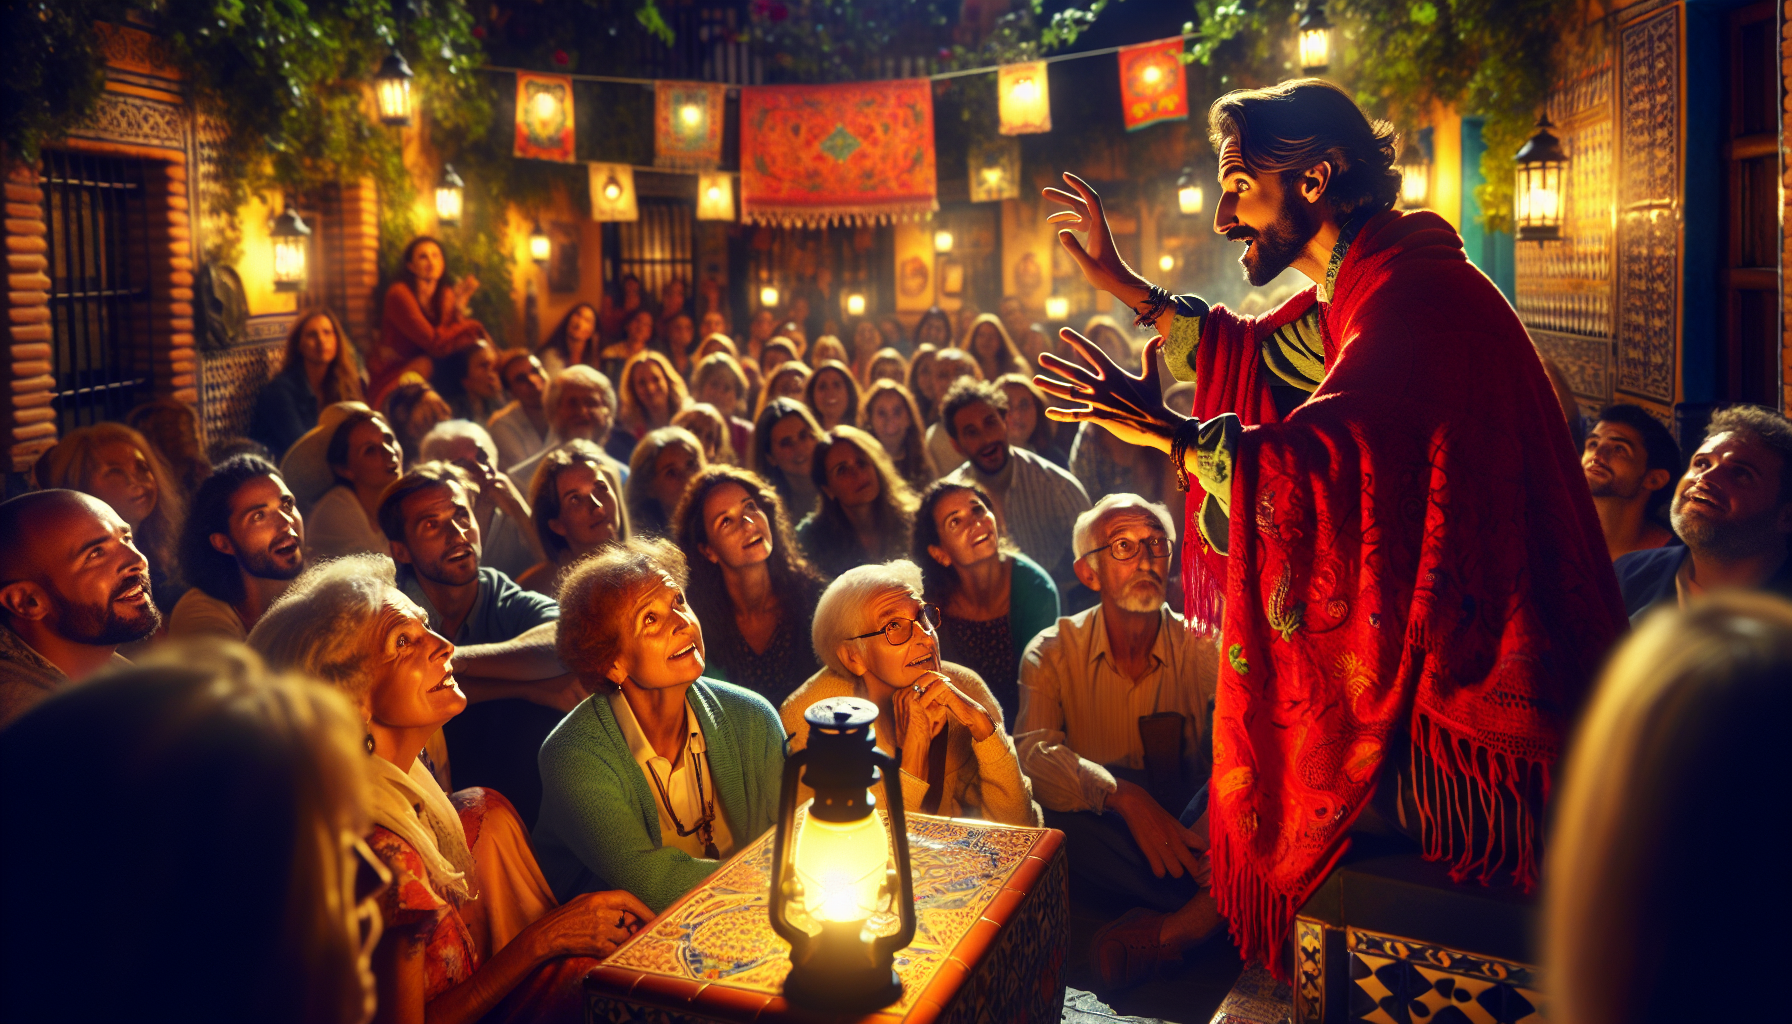 Illustration of a classic Spanish short story being told by a storyteller